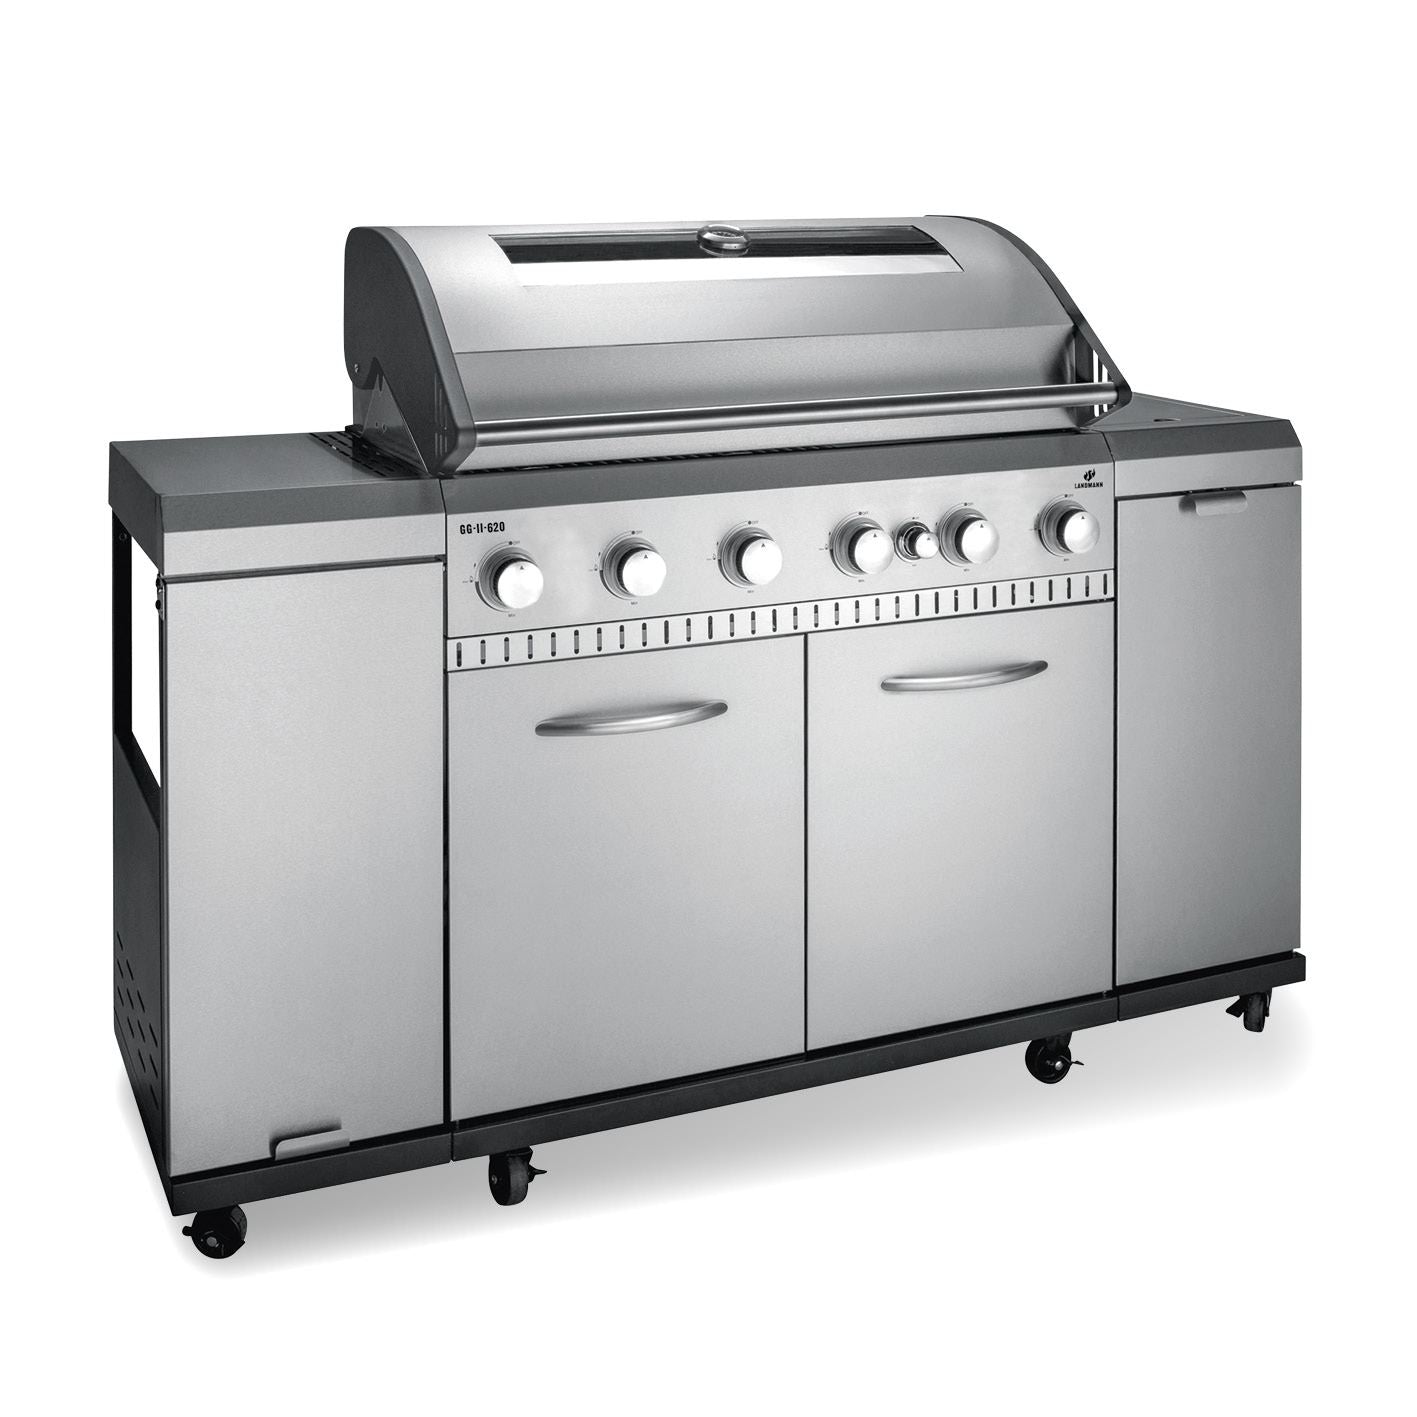 Rexon cooK 6.1 Gas BBQ - Stainless Steel & Weatherproof Cover